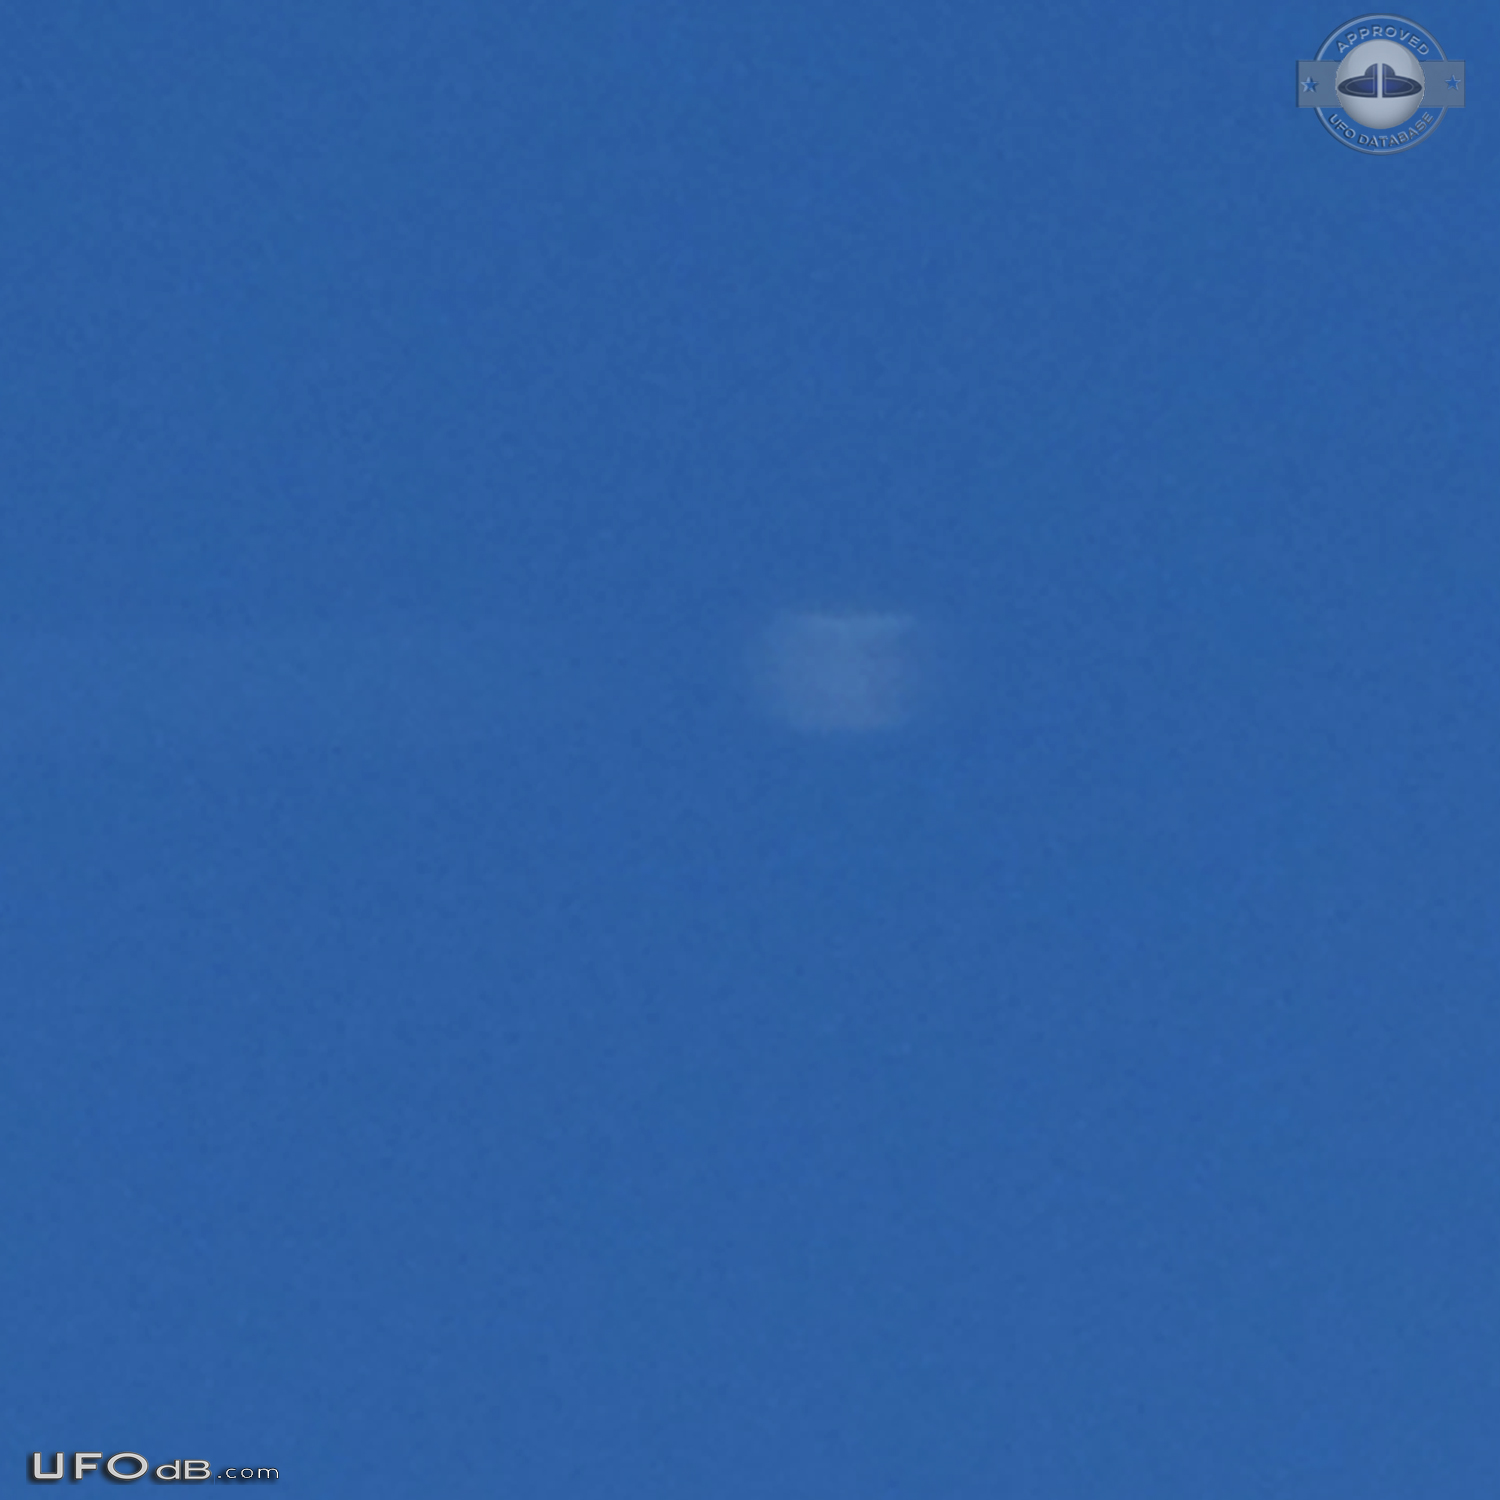 Took a picture and saw the UFO later on picture St-Tropez France 2012 UFO Picture #716-5